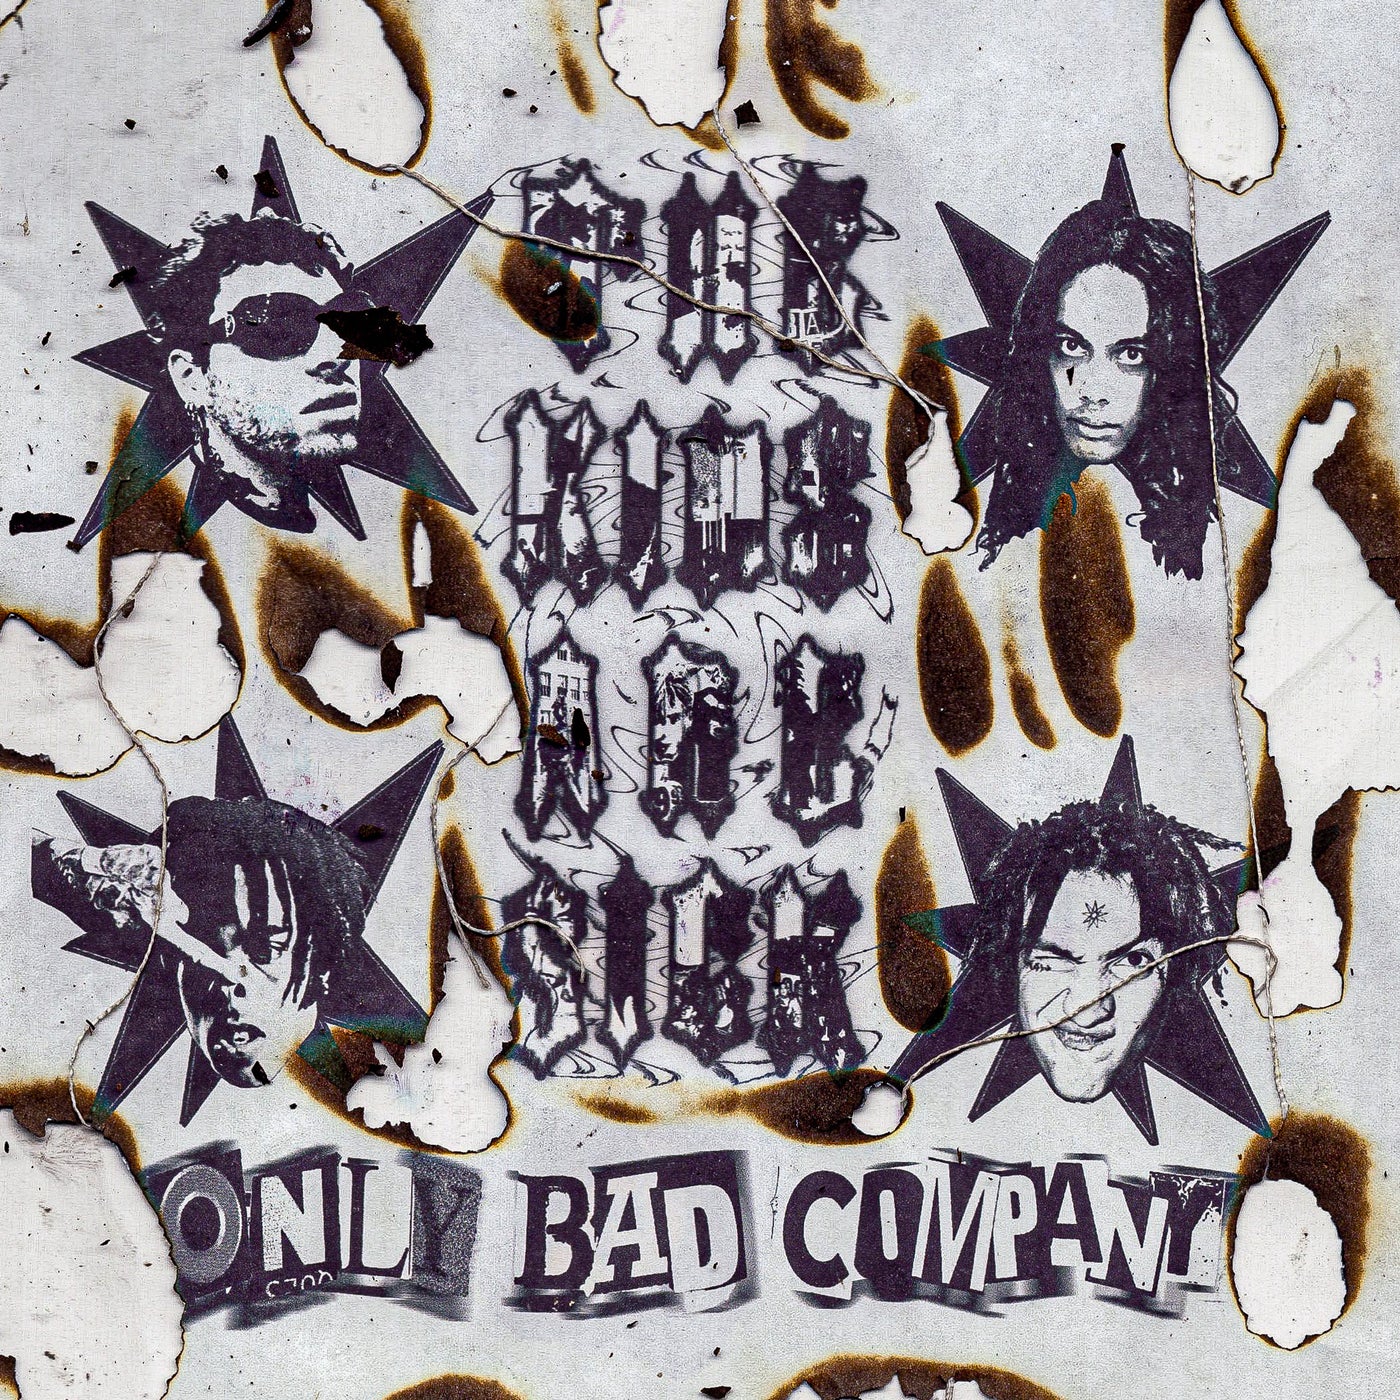 ONLY BAD COMPANY VOL. 1 by ONLY BAD COMPANY, Mad Kelly